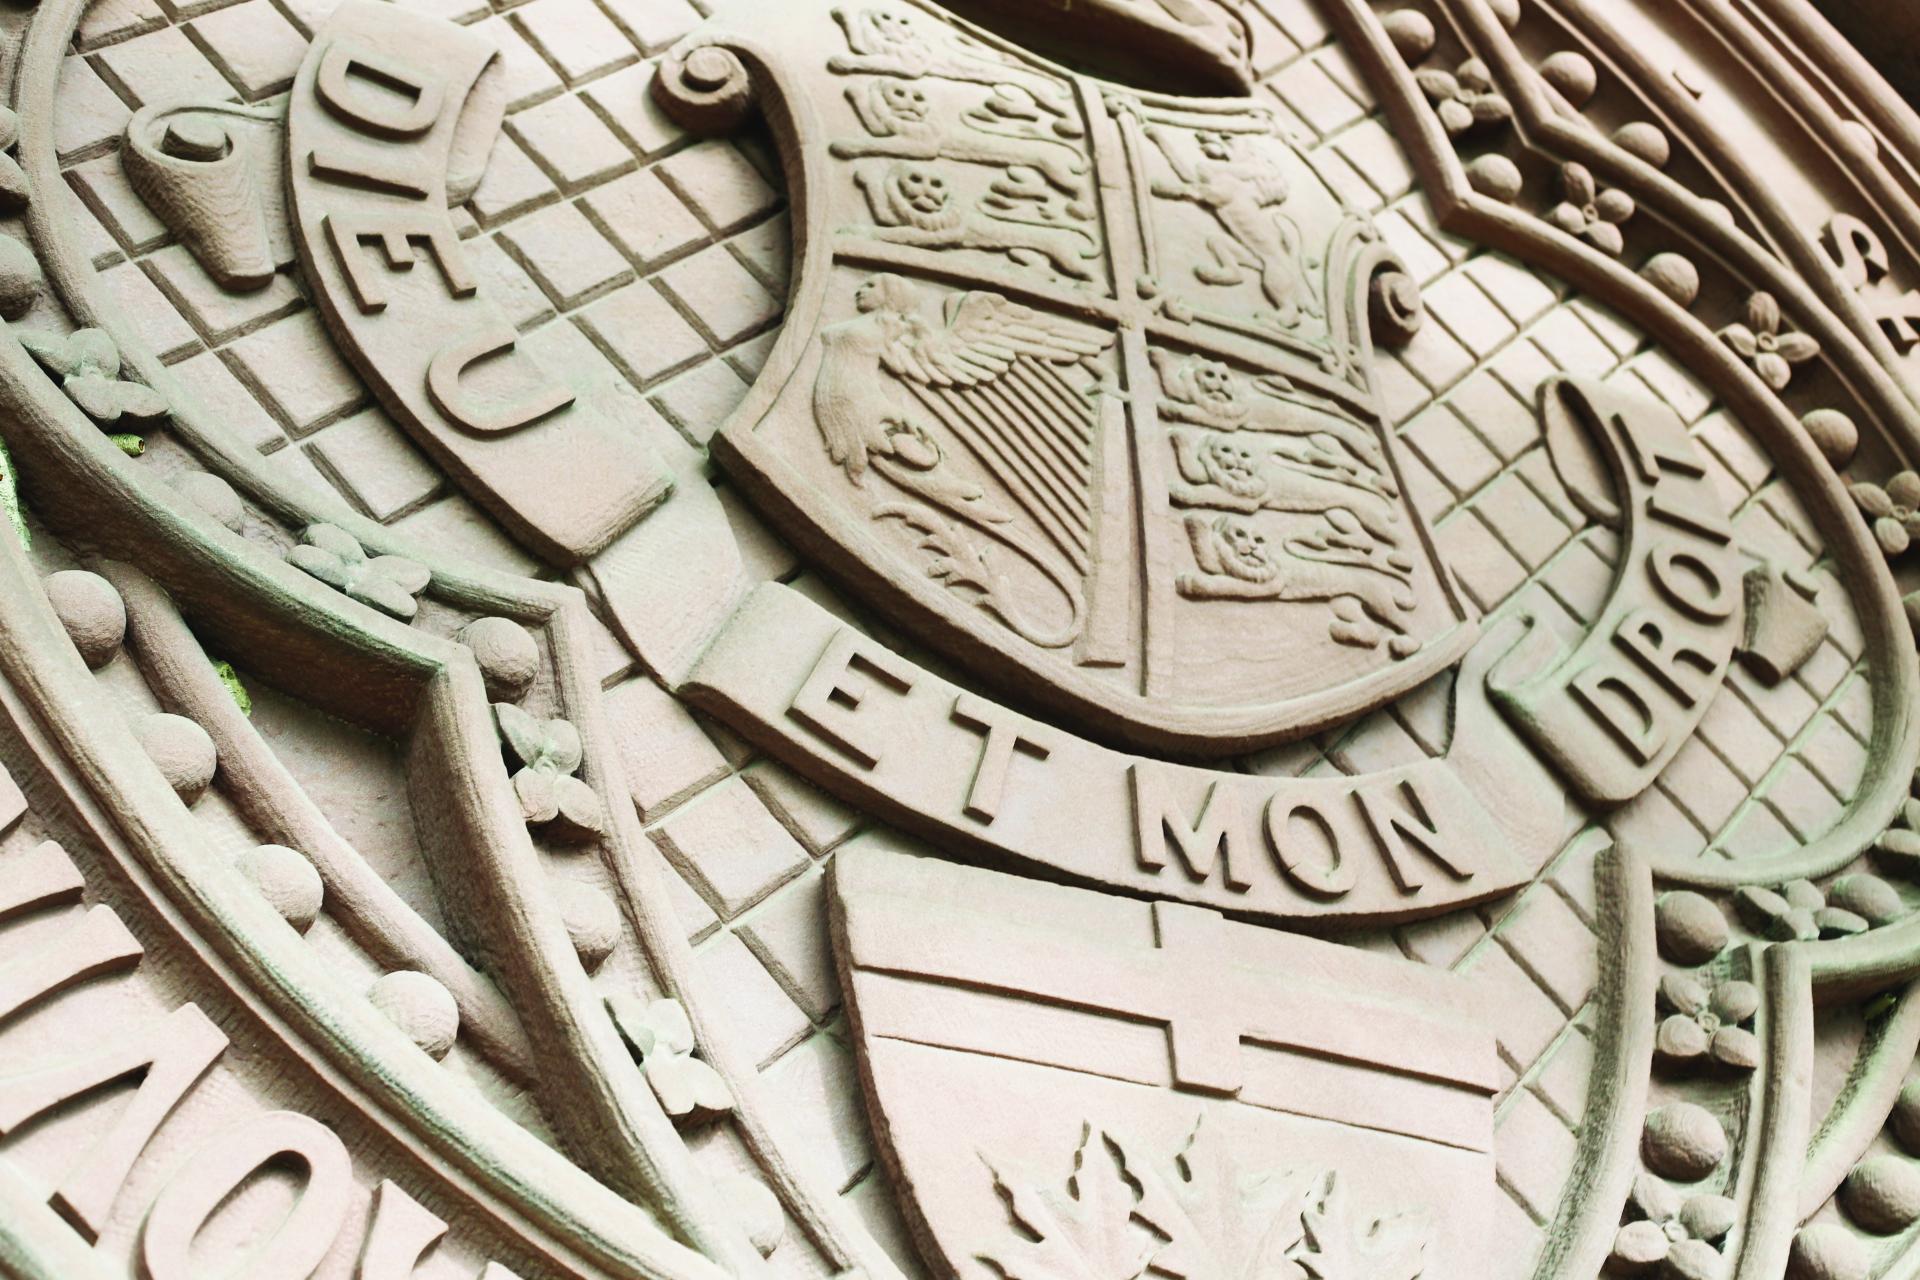 Picture of the Great Seal of the Province of Ontario - detail view